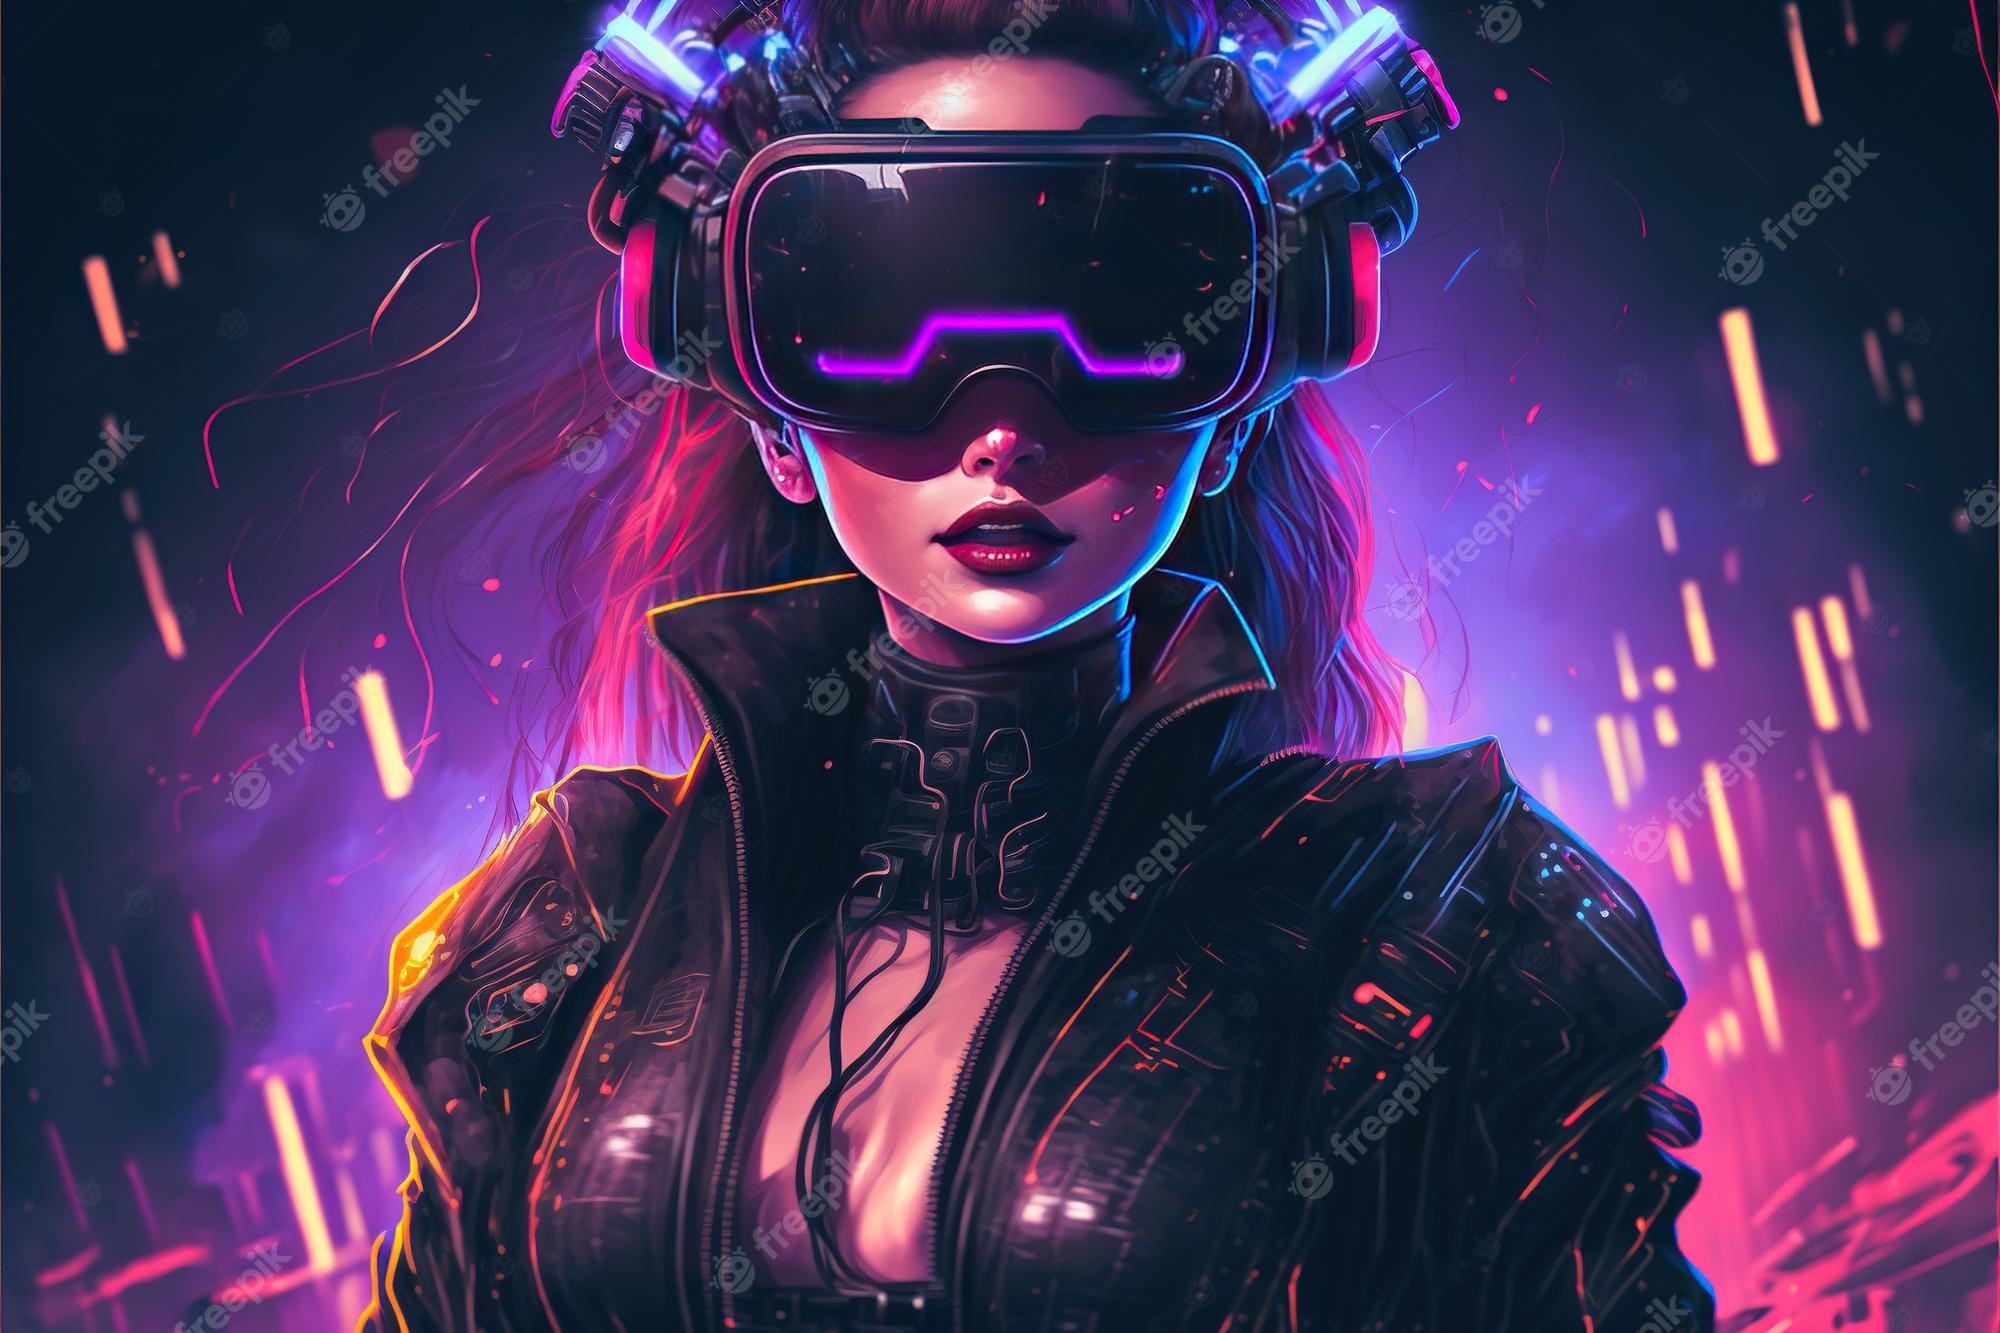 Premium Photo. Cyberpunk woman portrait with vr headset in high quality avatar wallpaper high resolution neon fururistic cyber implants technology universe light city technology addiction ai